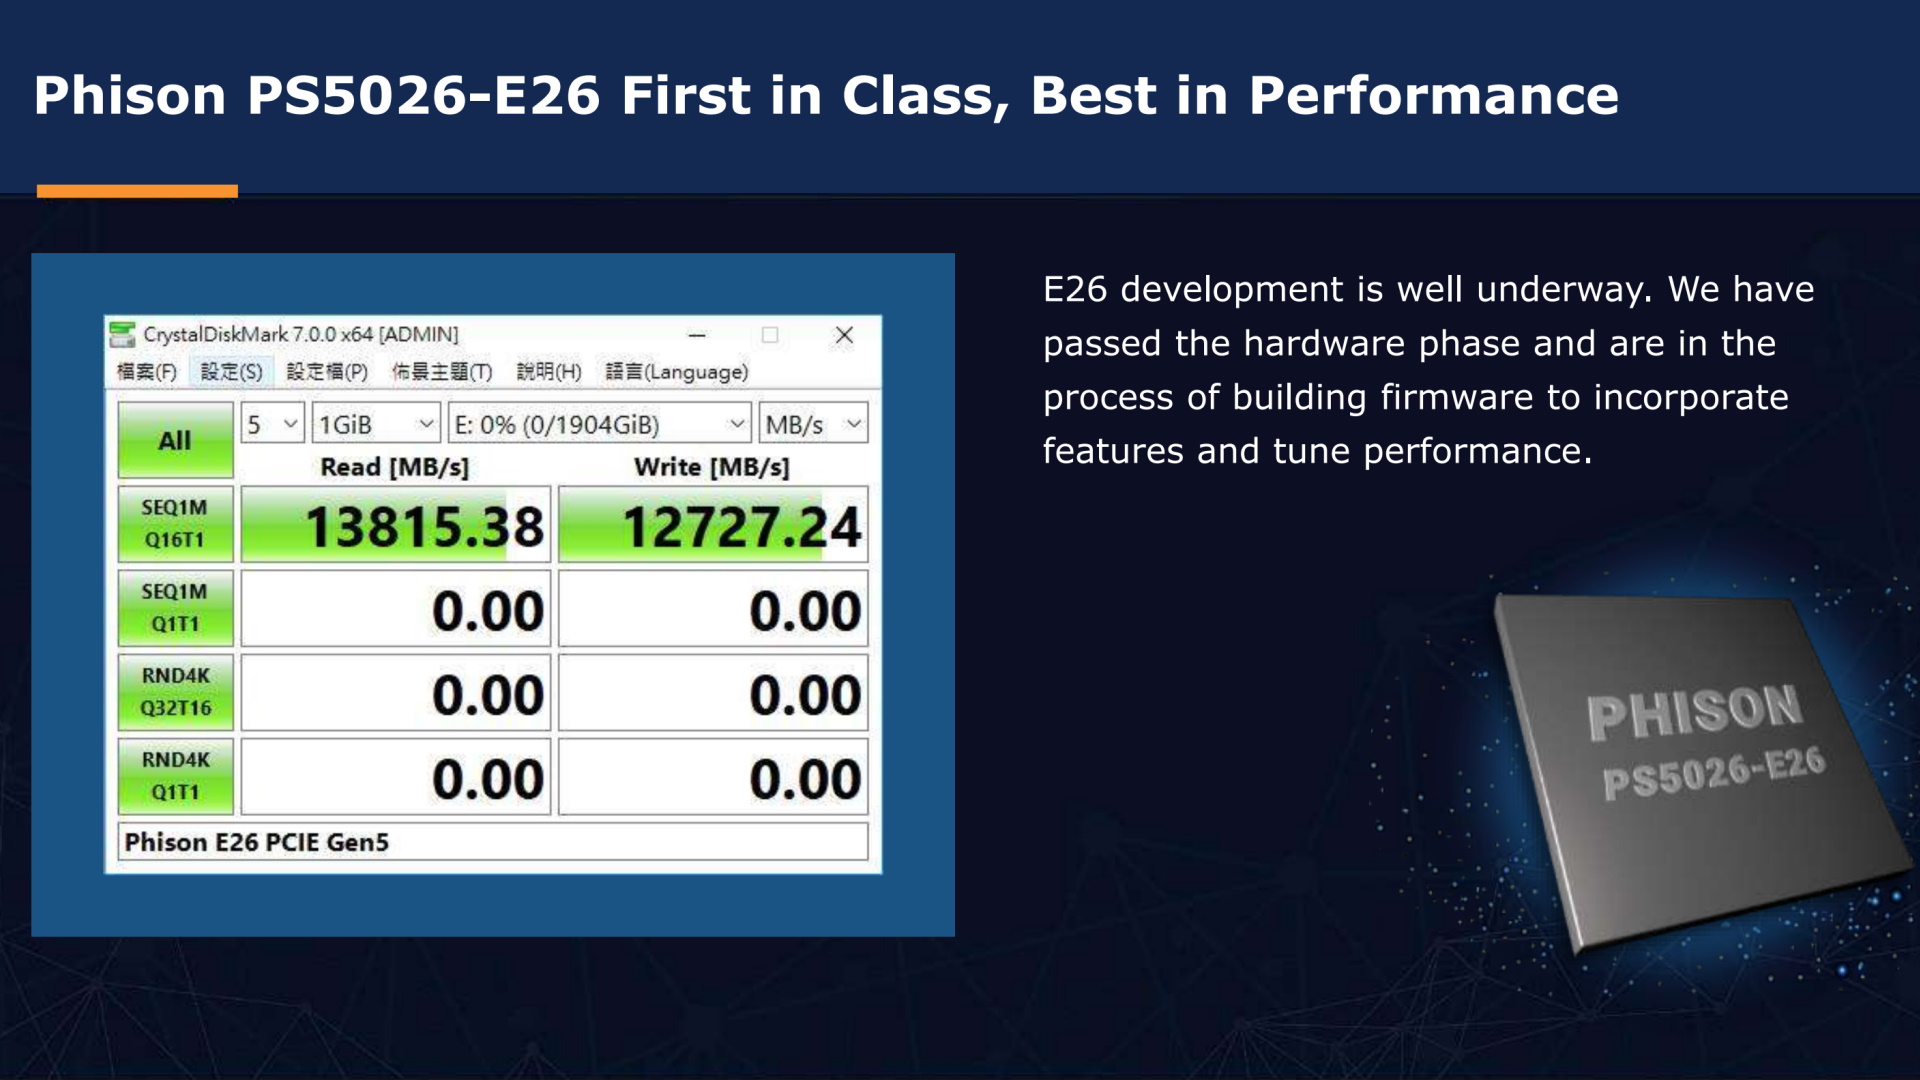 Phison E26 performance is looking good.